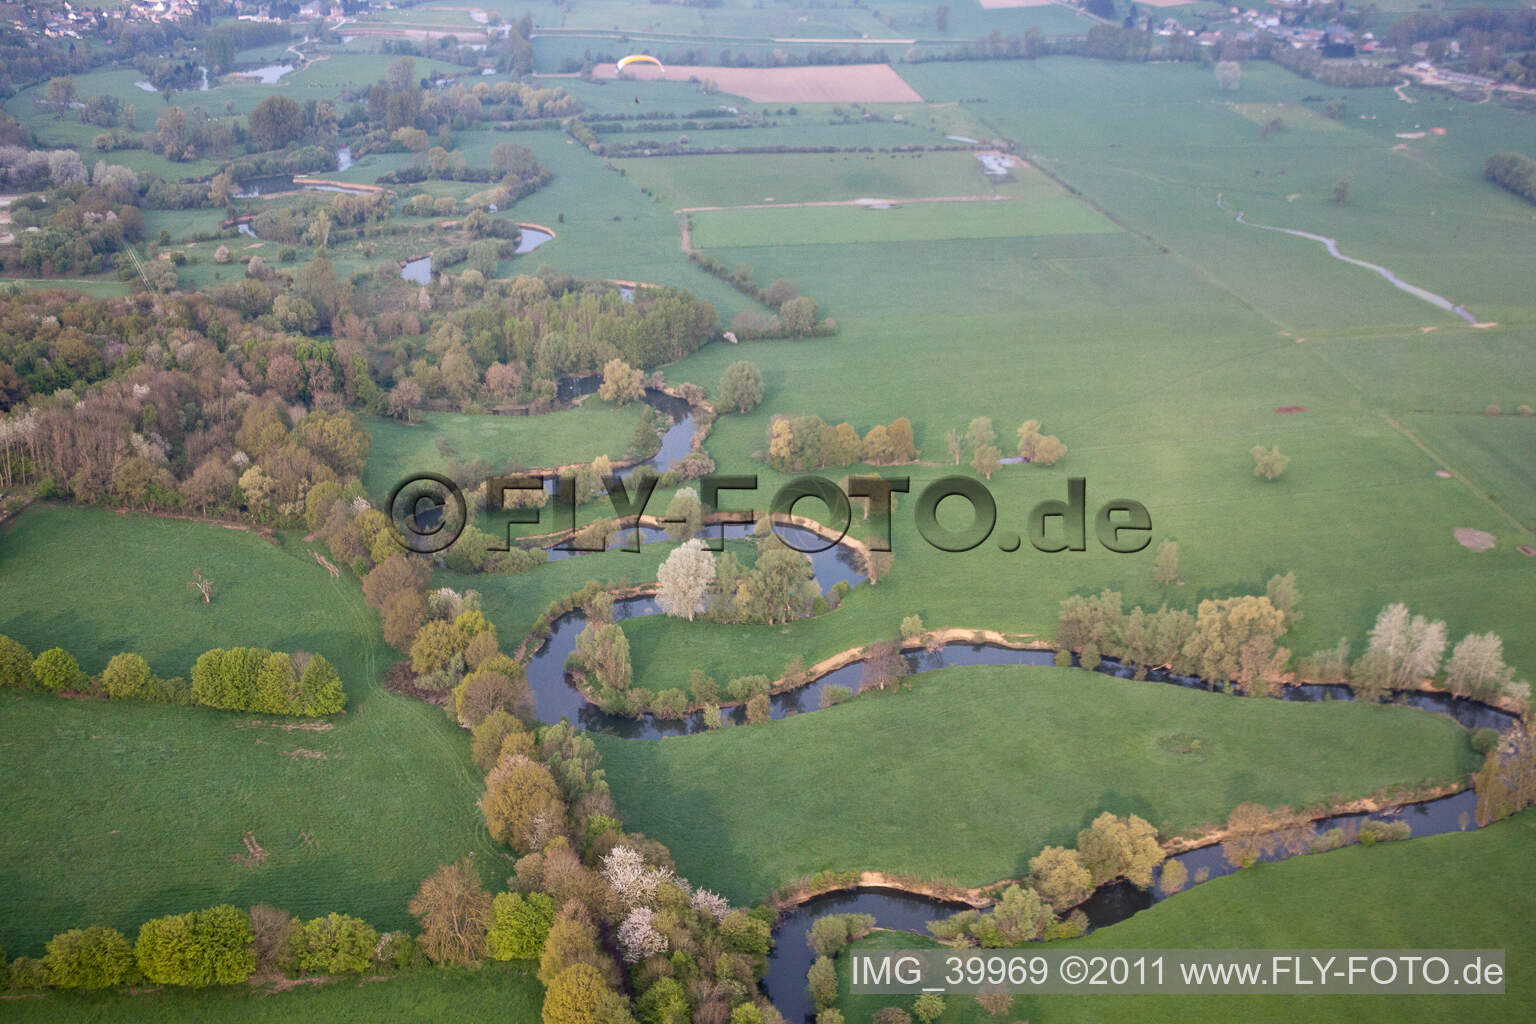 Aerial view of Oise in Marly-Gomont in the state Aisne, France